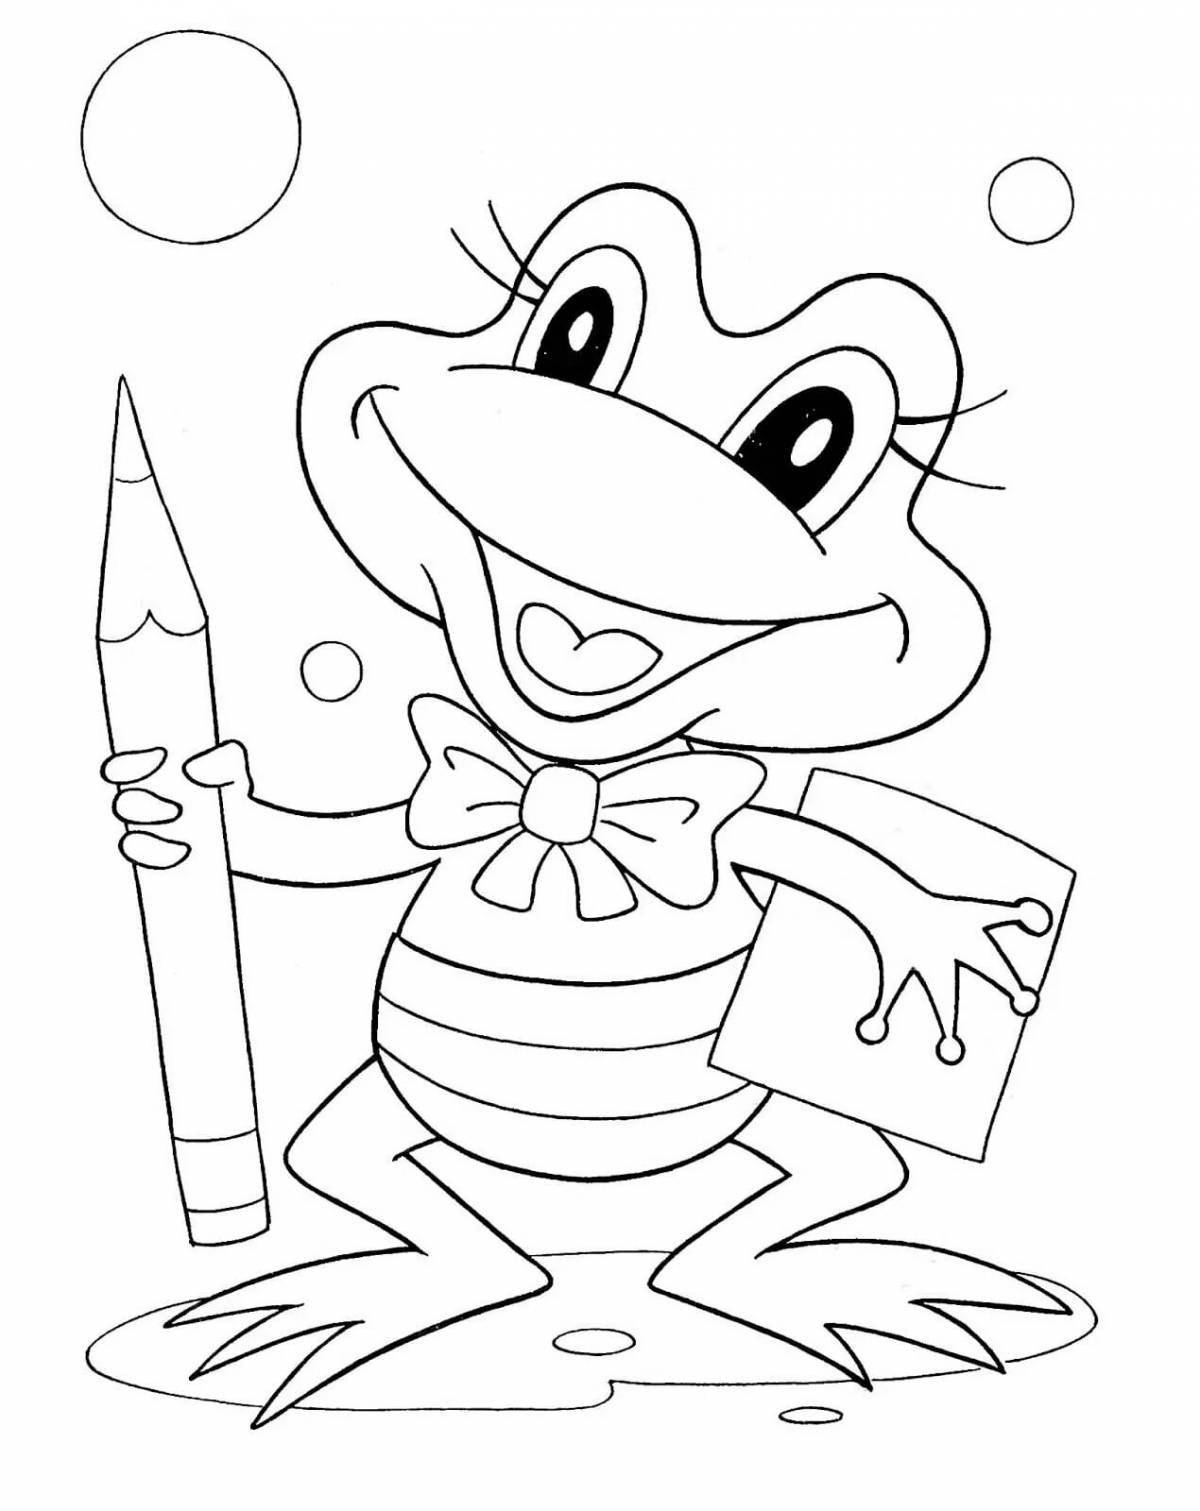 Coloring book for children 5 6 years old #16